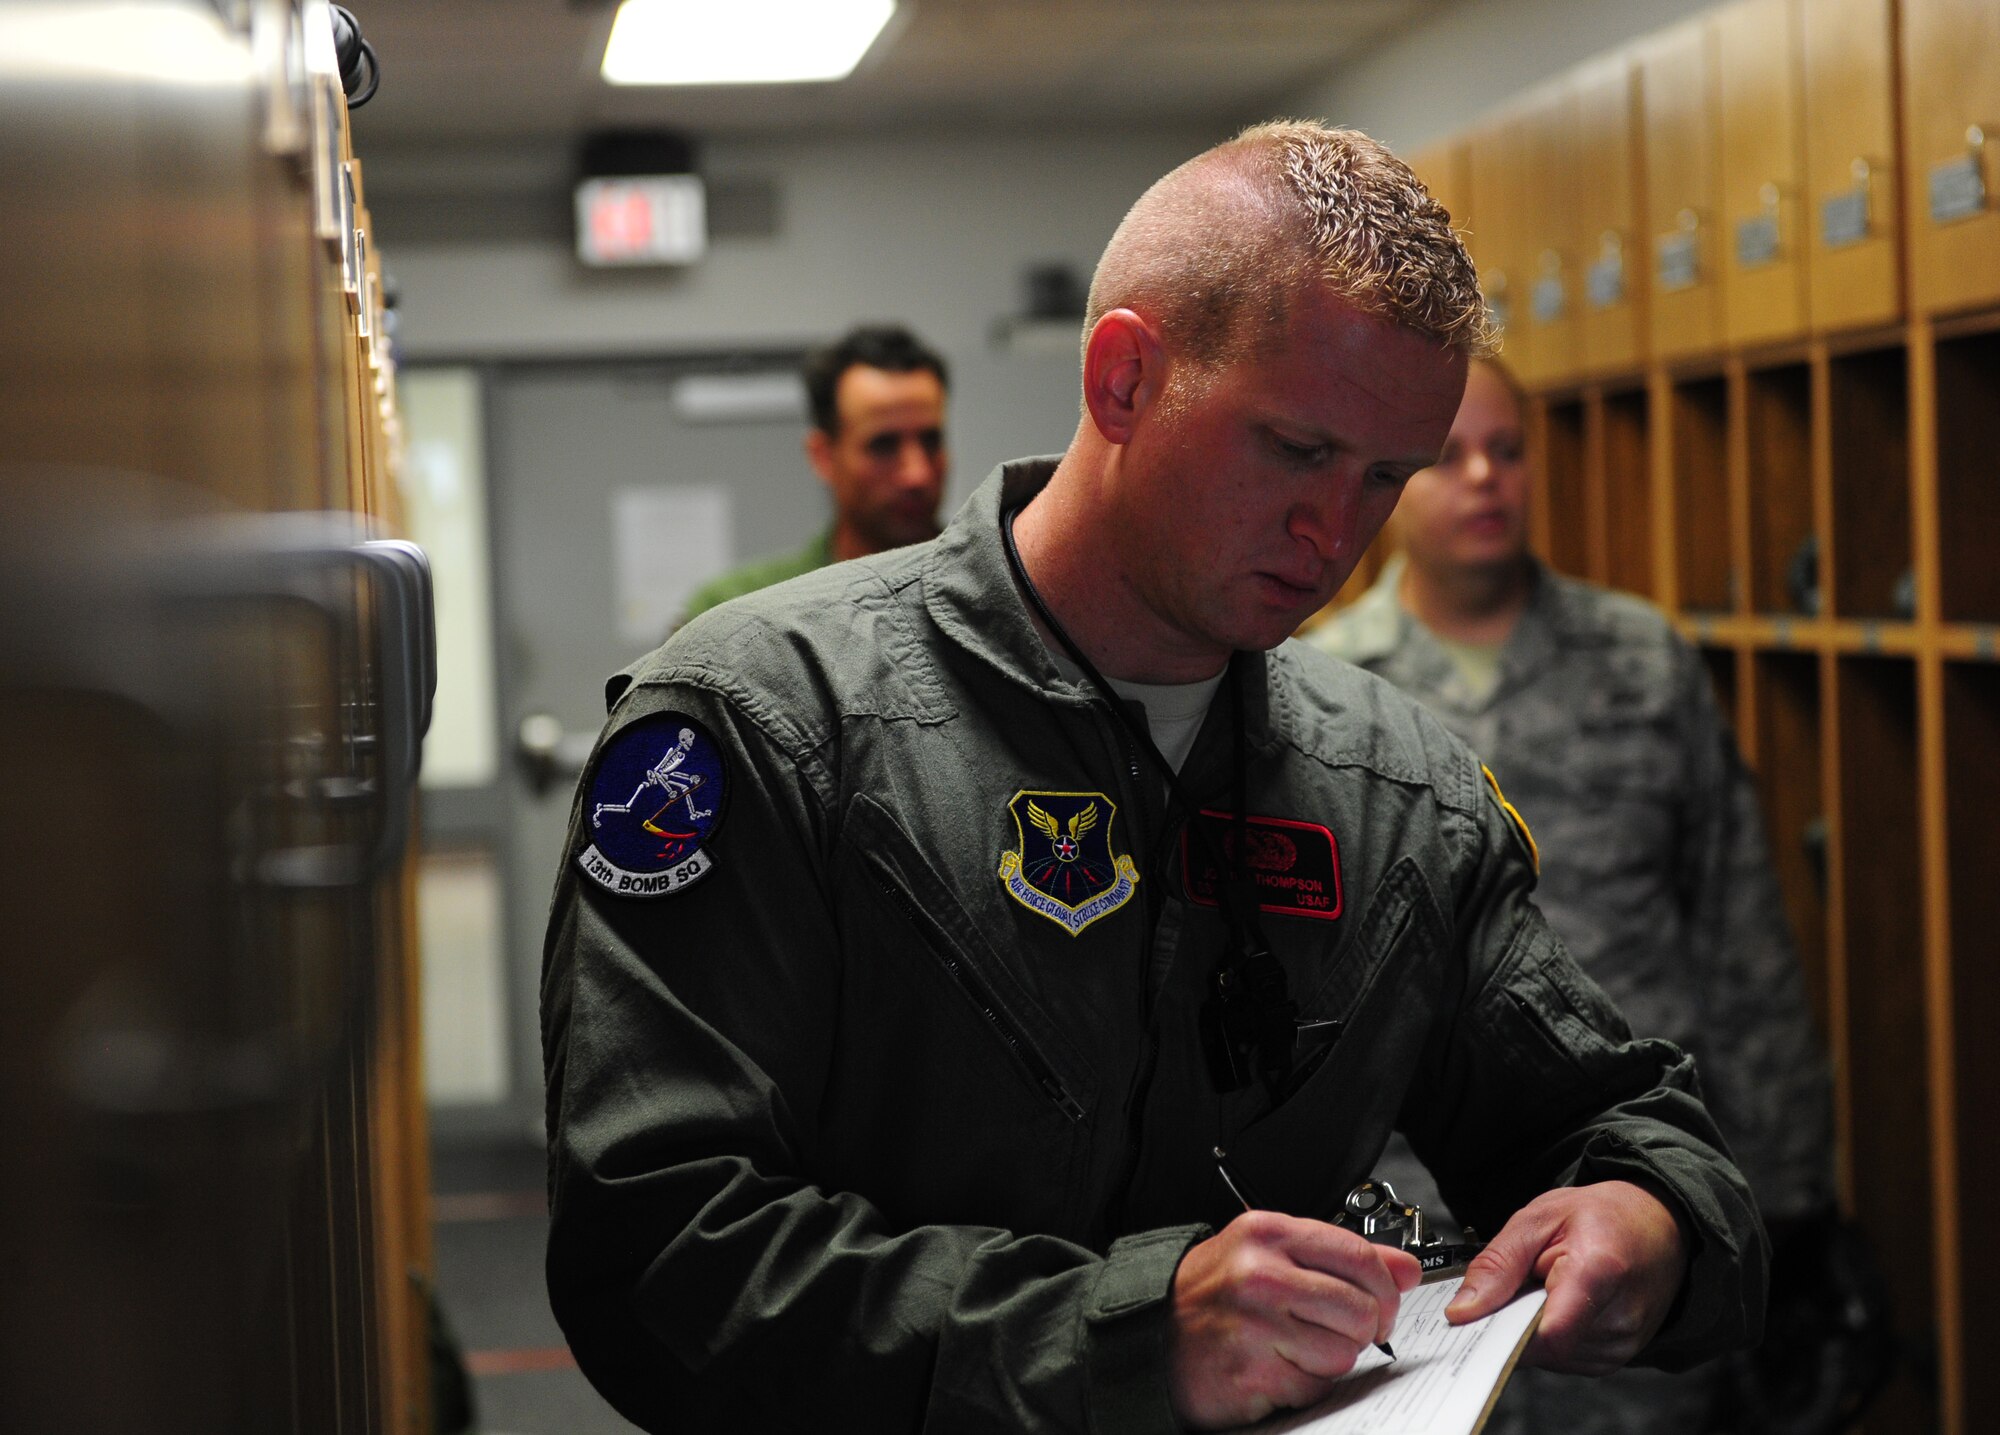 Air Force Staff Sgt. Joshua Thompson, 509th Aircraft Maintenance Squadron dedicated crew chief, signs out flight equipment prior to being an incentive rider on a B-2 Spirit at Whiteman Air Force Base, Mo., July 10, 2015. Before flying, Thompson, along with two other dedicated crew chiefs, attended briefings, Aerospace Physiology Training and received flight physicals. (U.S. Air Force photo by Senior Airman Joel Pfiester/Released)